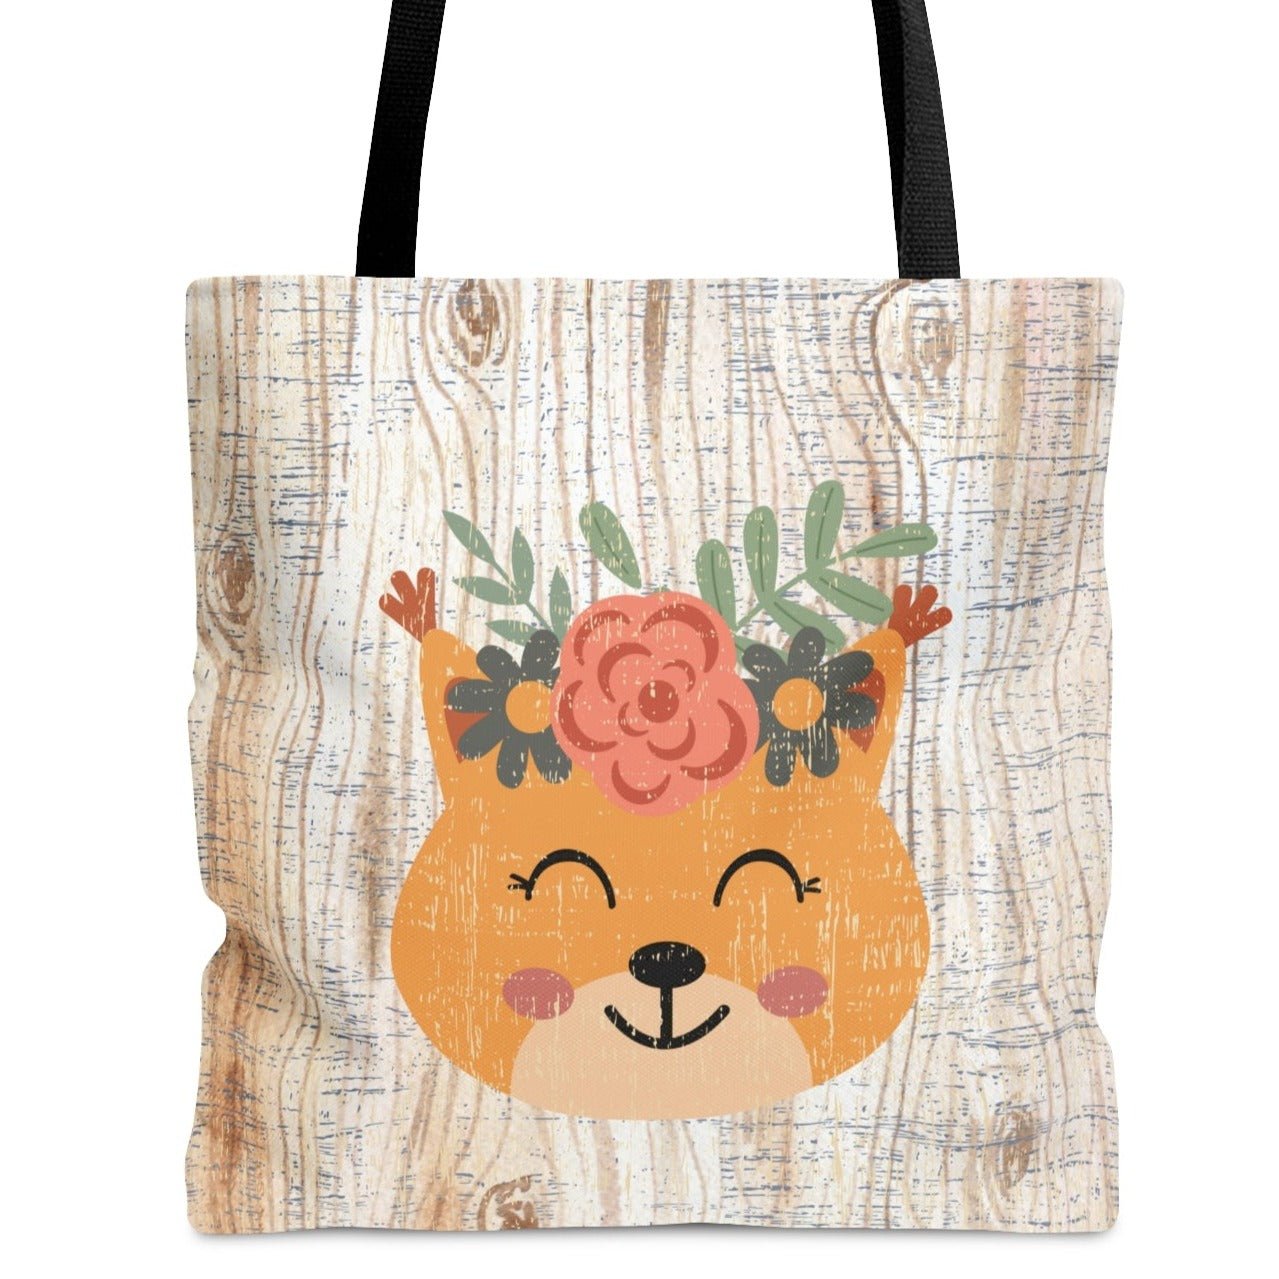 Bear with Flowers on White Wood Background Large Tote Bag - Whimsical Nature-Inspired Accessory - Eddy and Rita